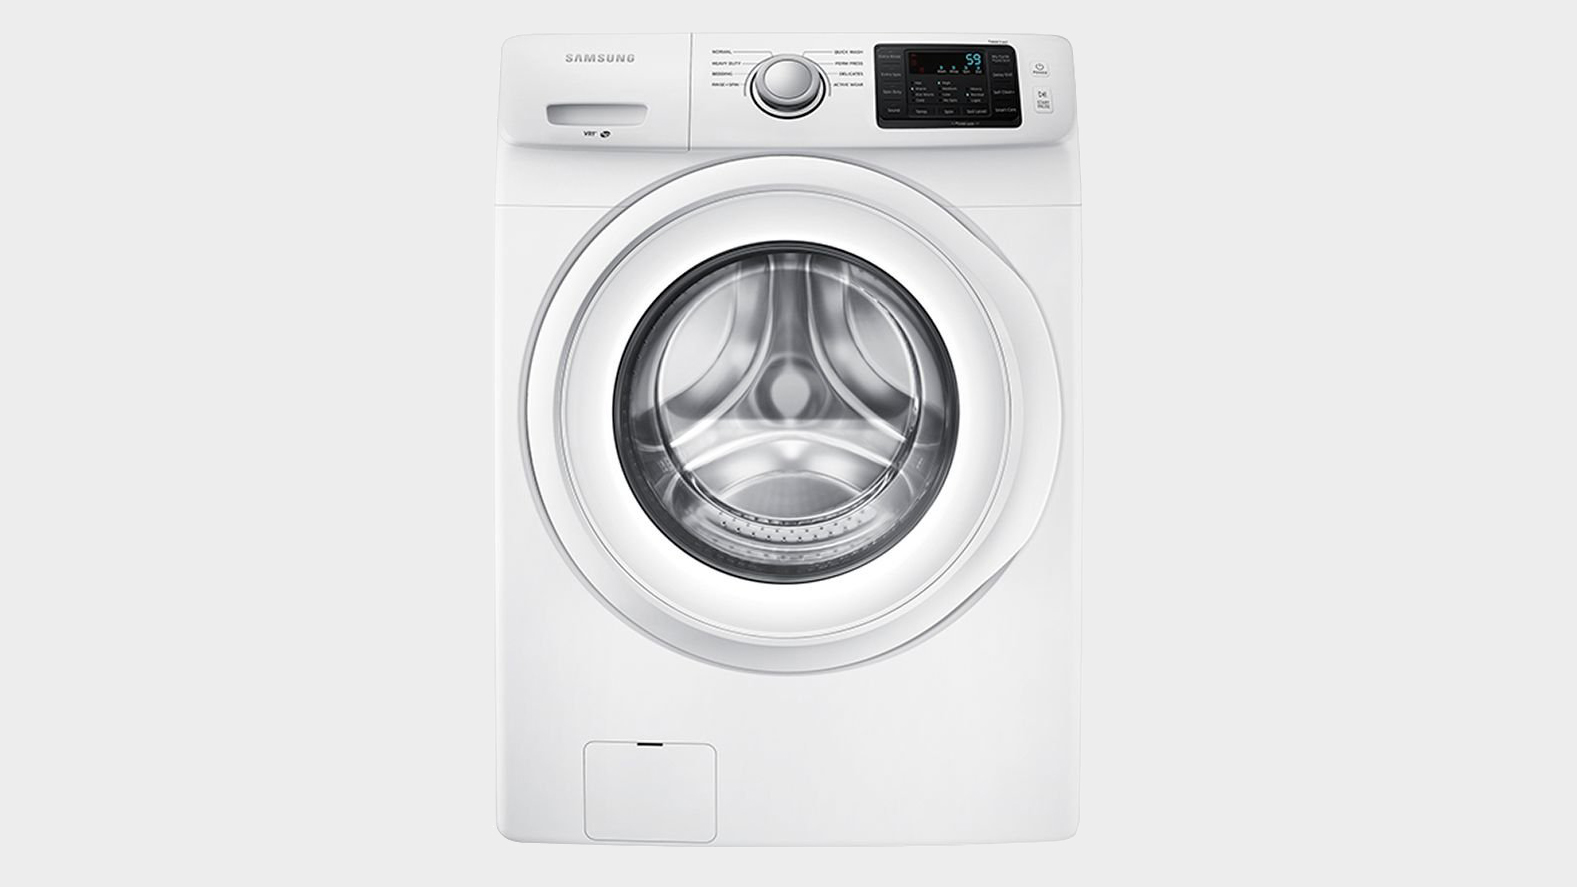 Samsung WF42H5000AW Front Load Washer Review